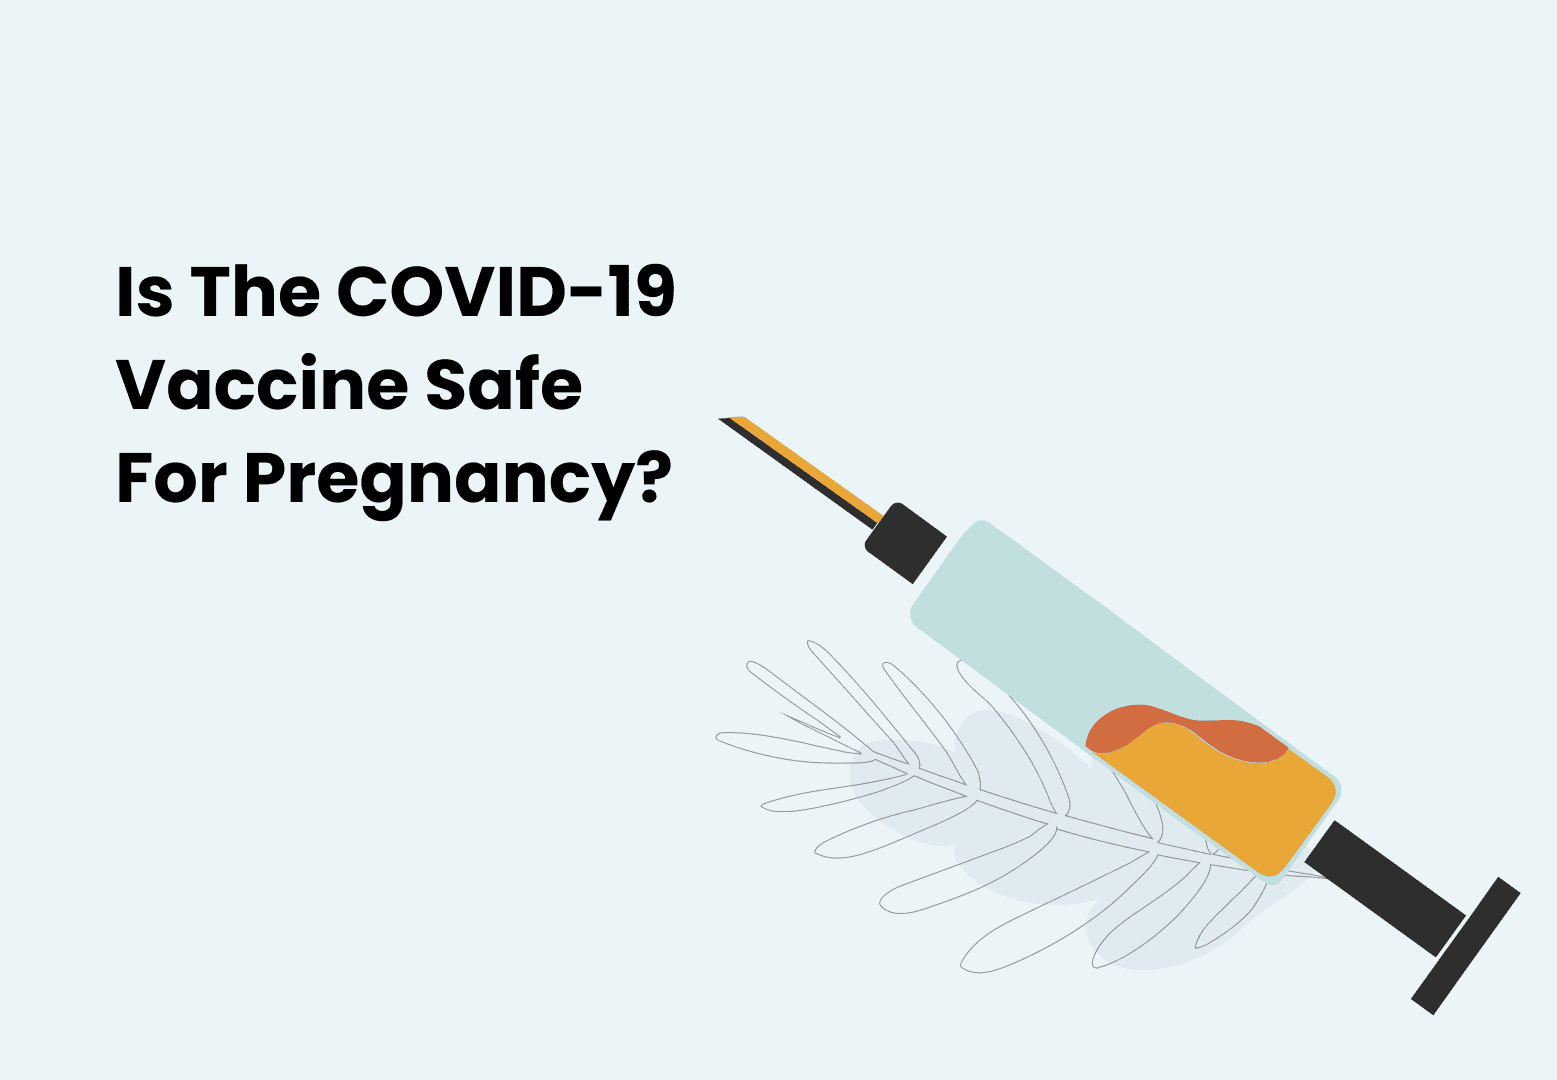 Is the COVID-19 vaccine safe for pregnancy?